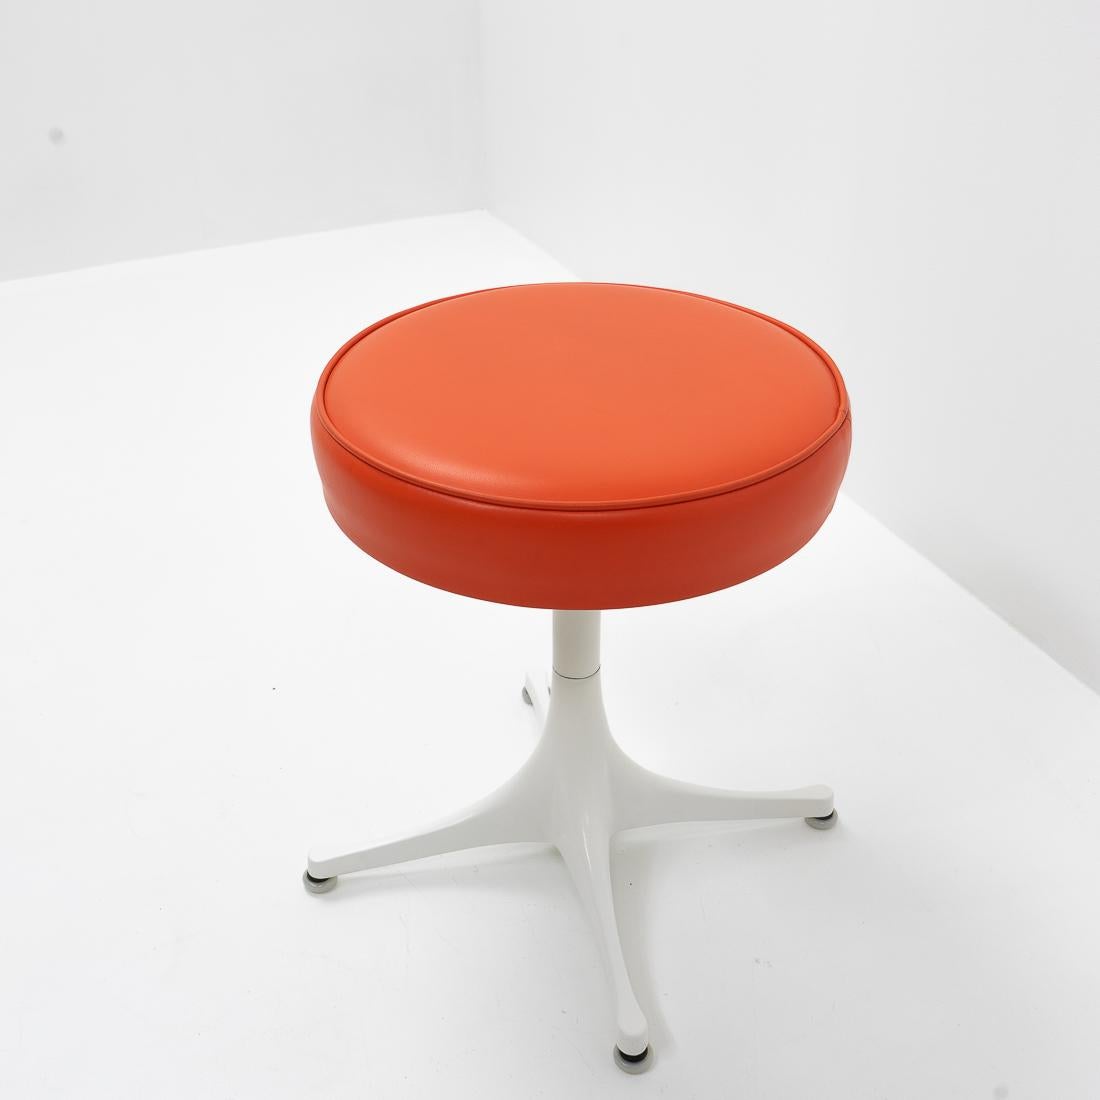 Vintage Design Nelson Swivel Pedestal Stool for Herman Miller, 1960s

Stool from the Pedestal series by George Nelson, with cover in playful orange vinyl. Nice and compact seat that could be practical in many situations and when not in use, easily